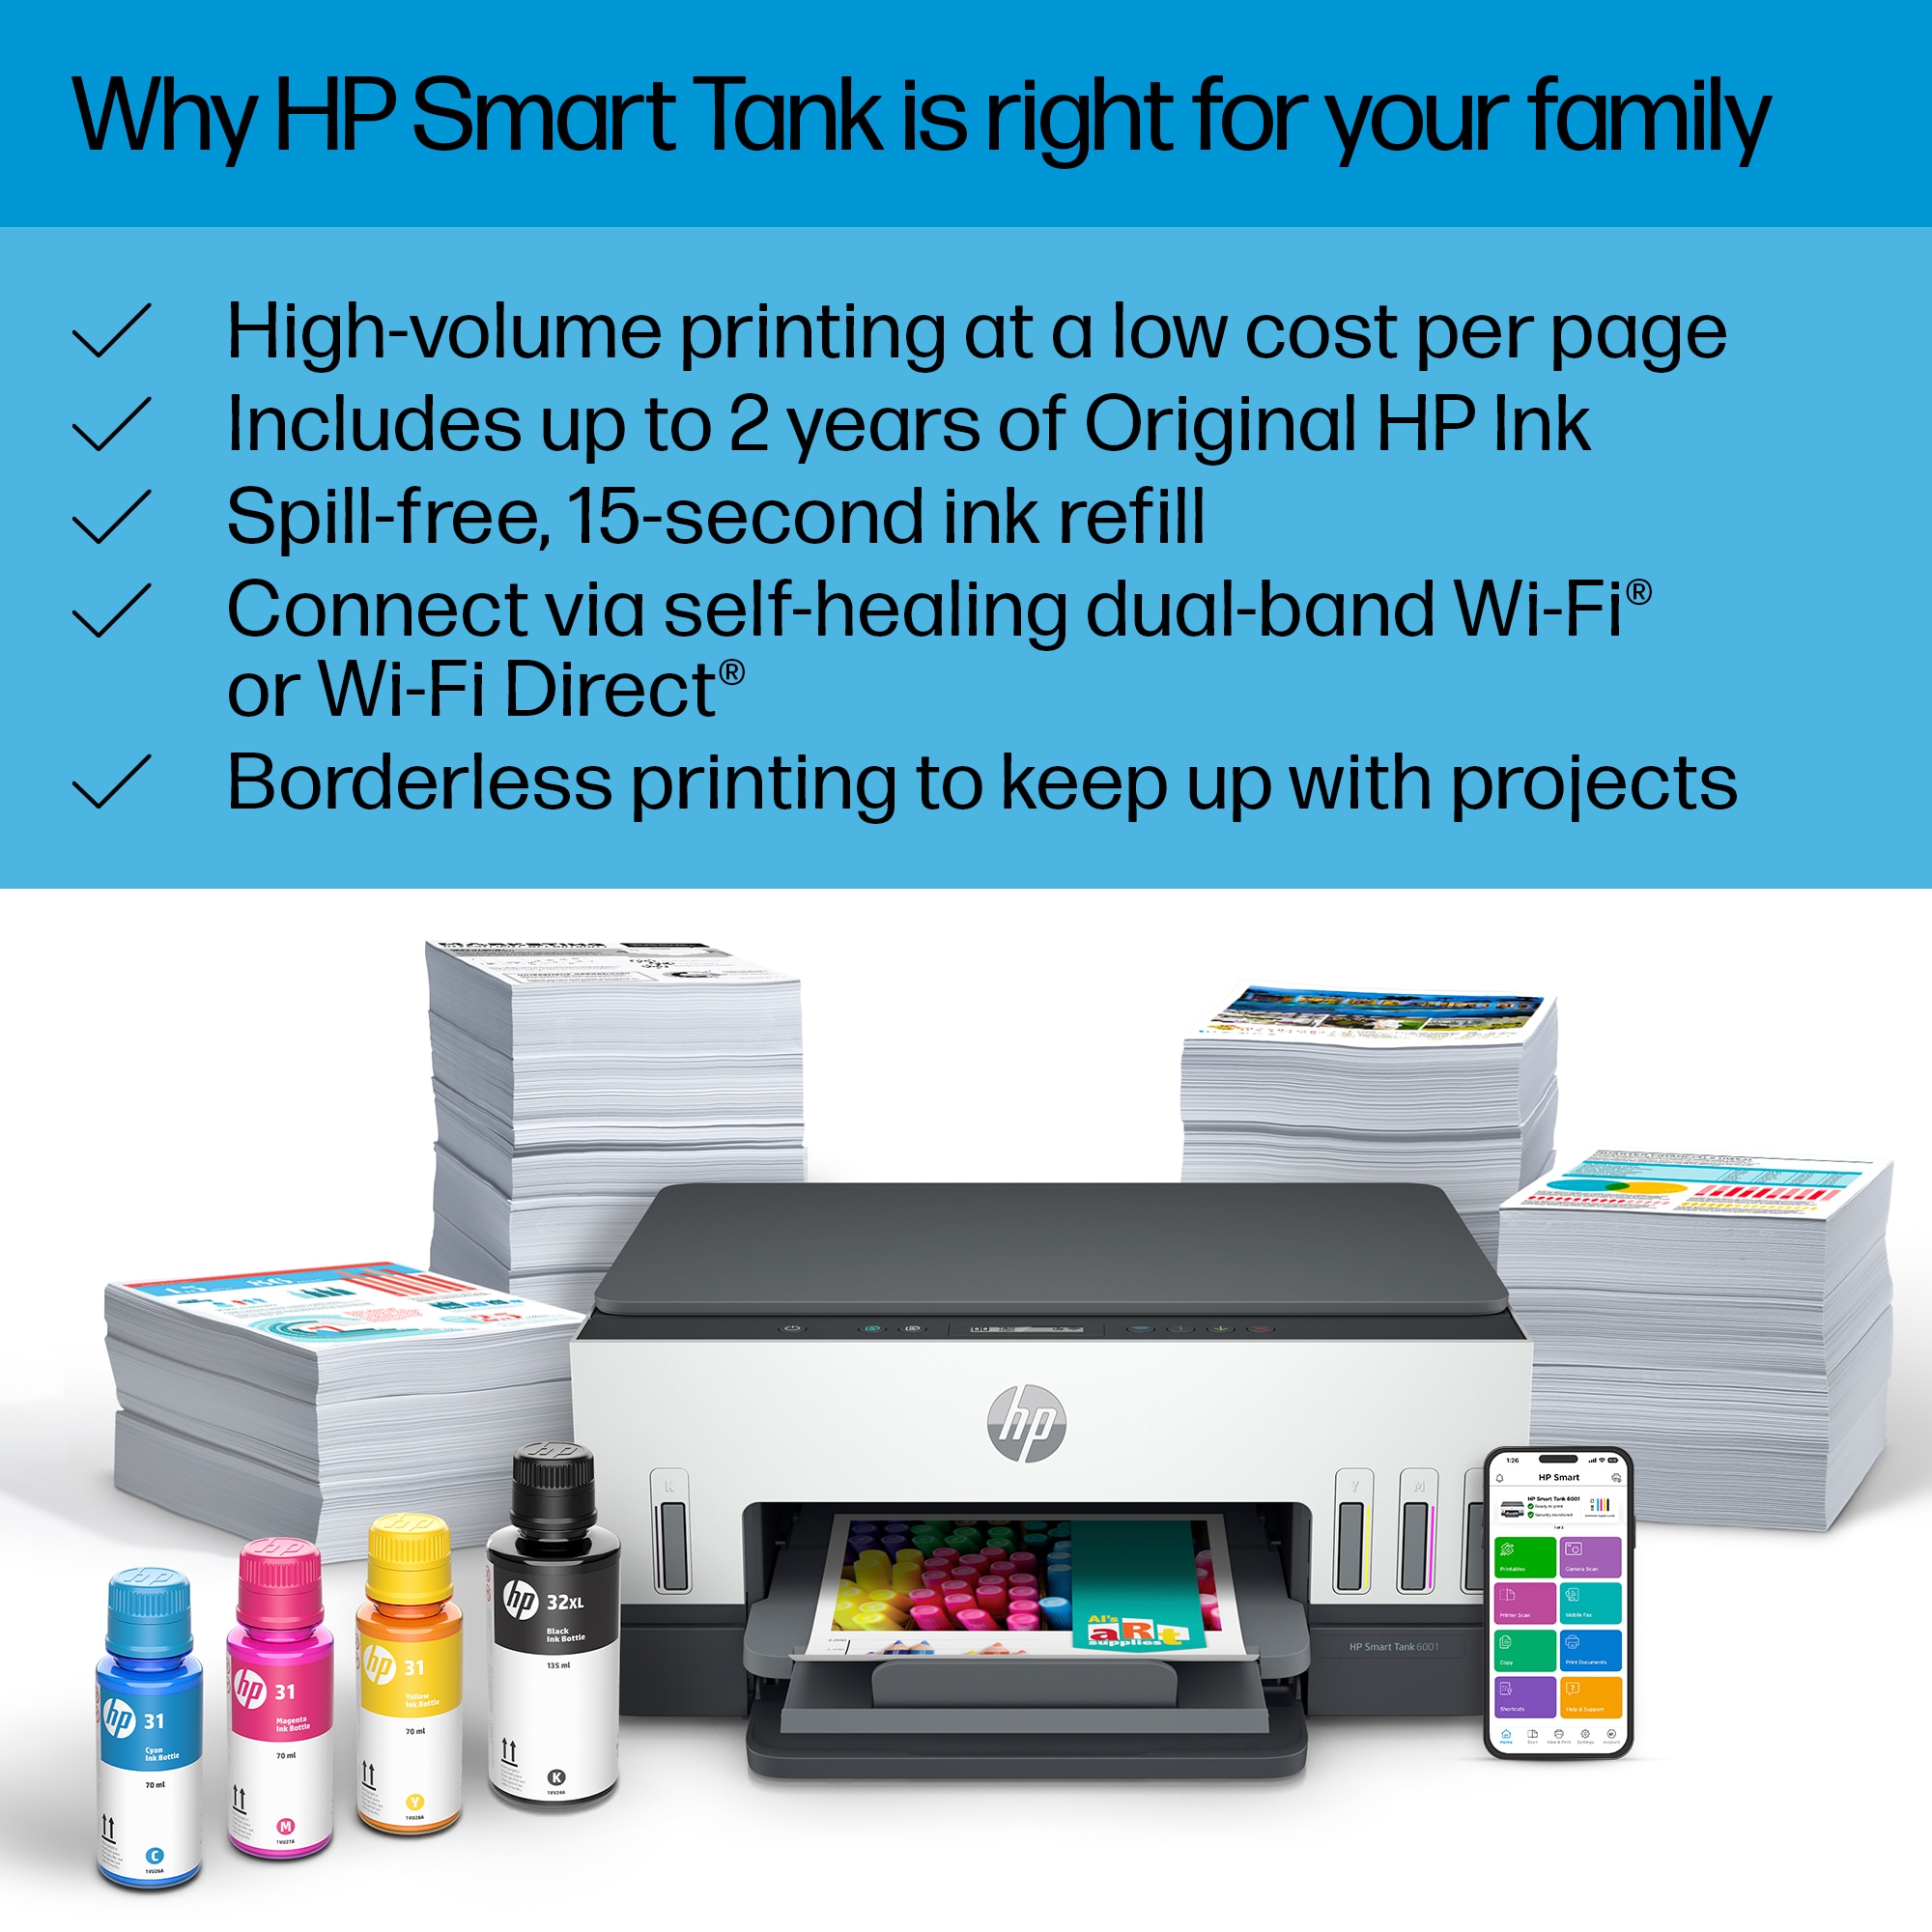 Unbox and Set Up the HP Ink Tank 110 Printer Series, HP Ink Tank